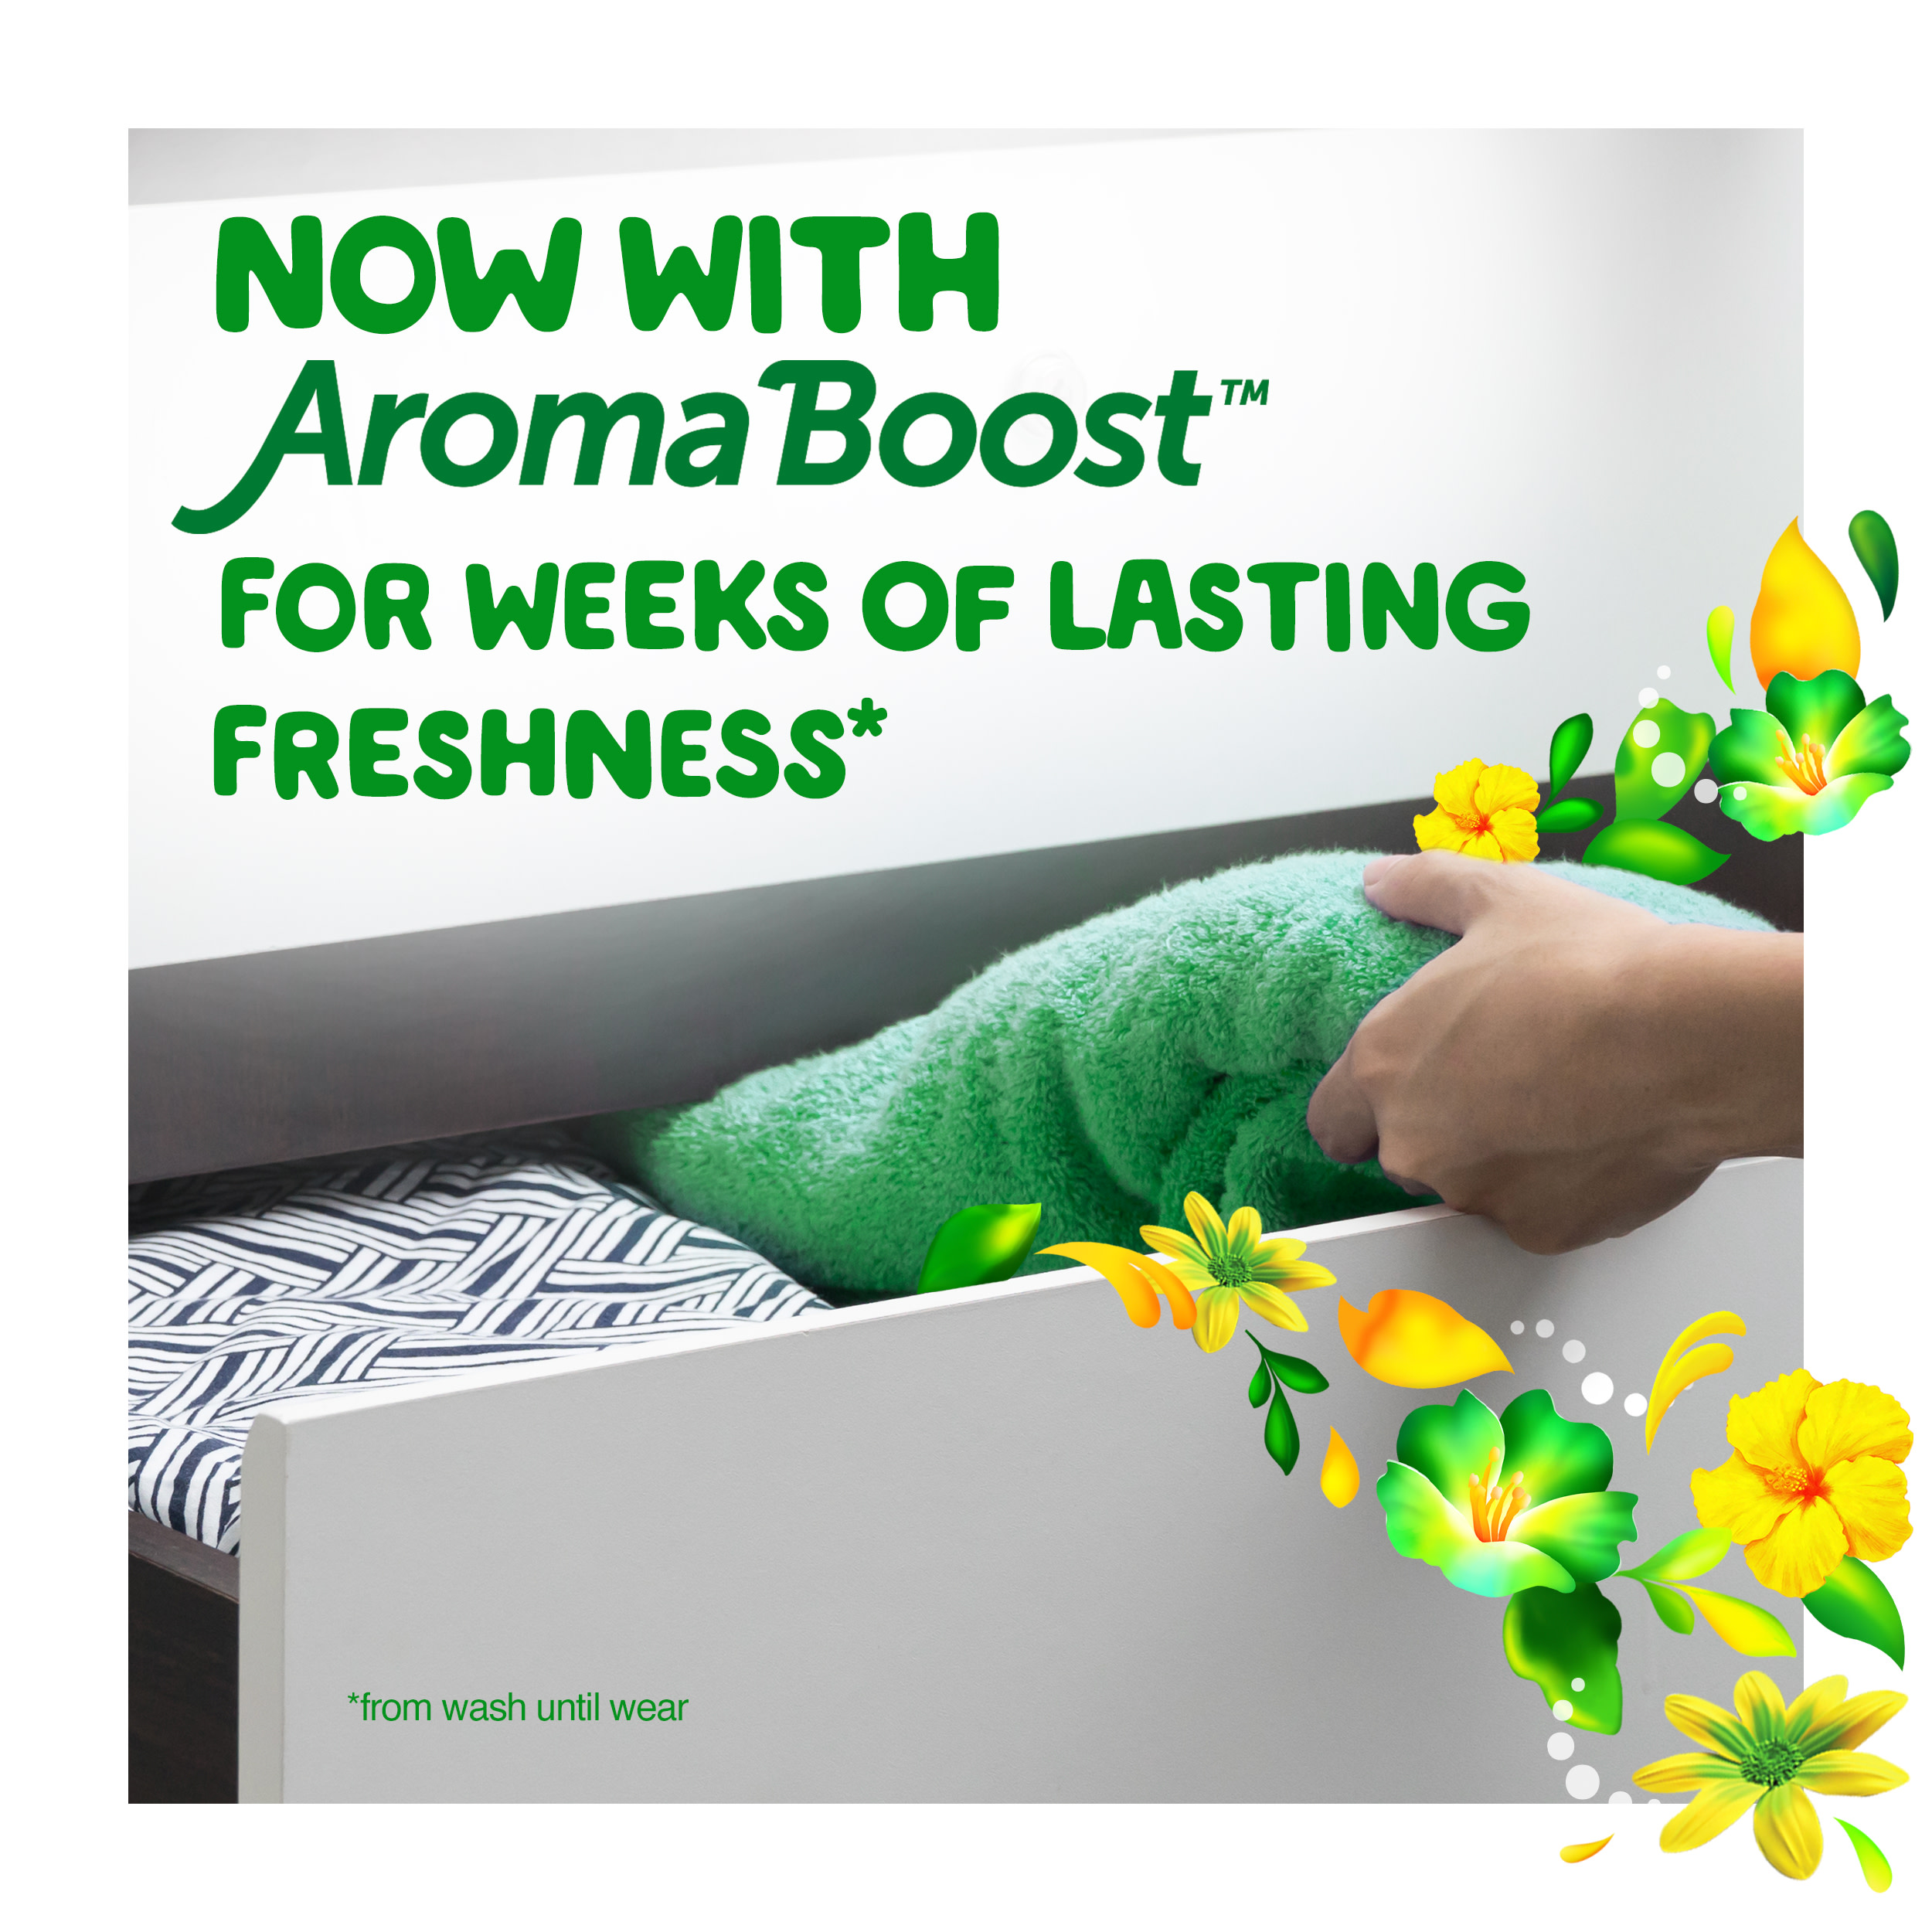 Gain Original Fabric Softener now with Aroma Boost for weeks of lasting freshness*